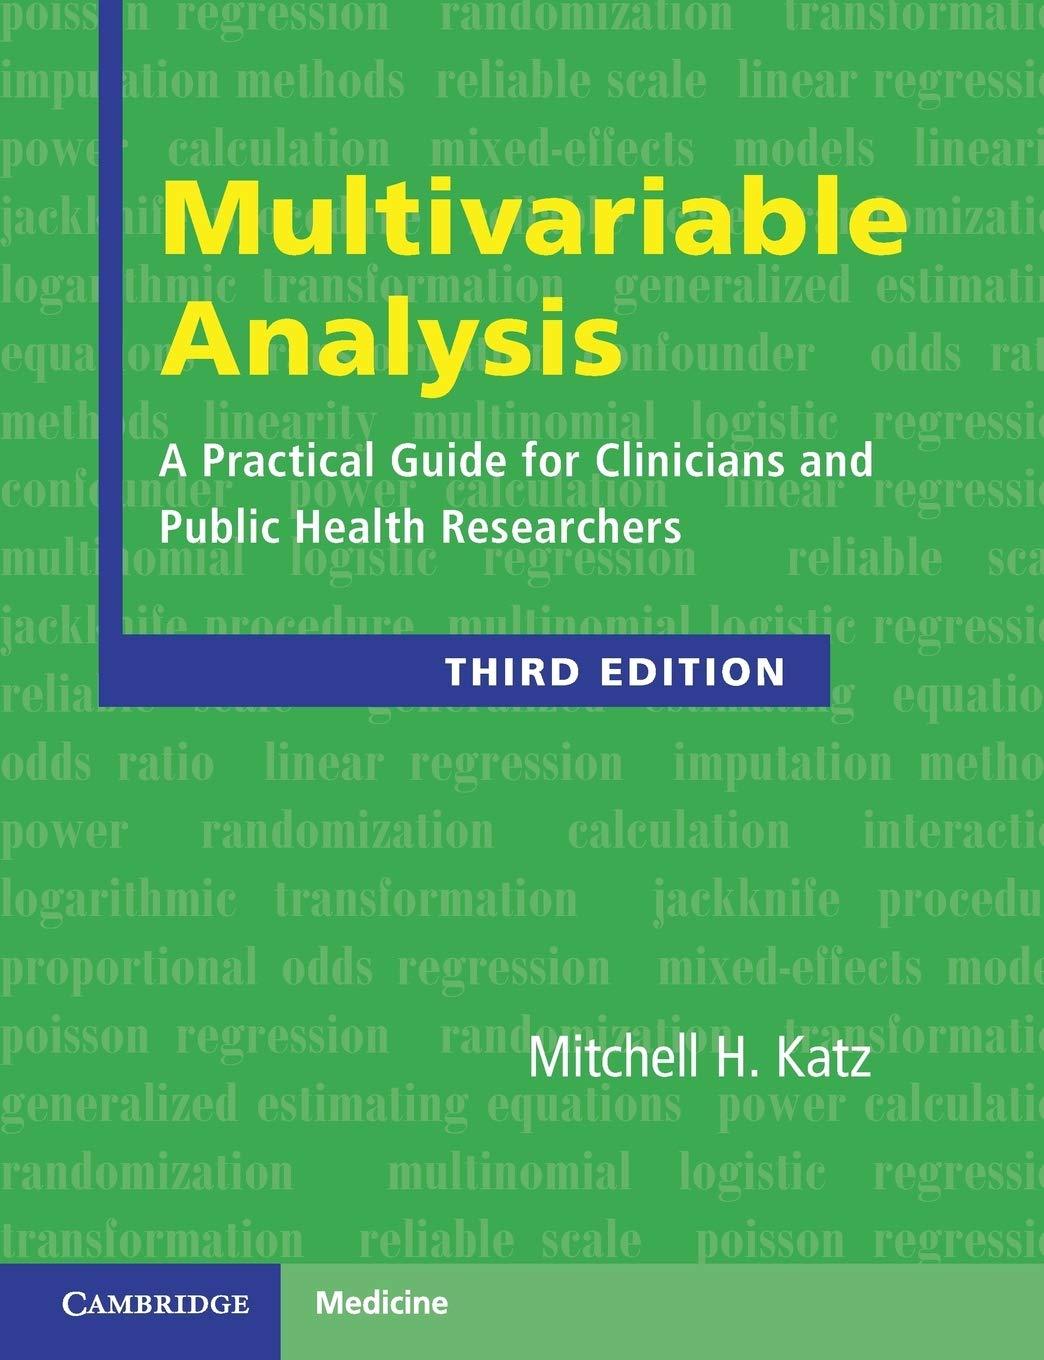 multivariable analysis: a practical guide for clinicians and public health researchers 3rd edition mitchell